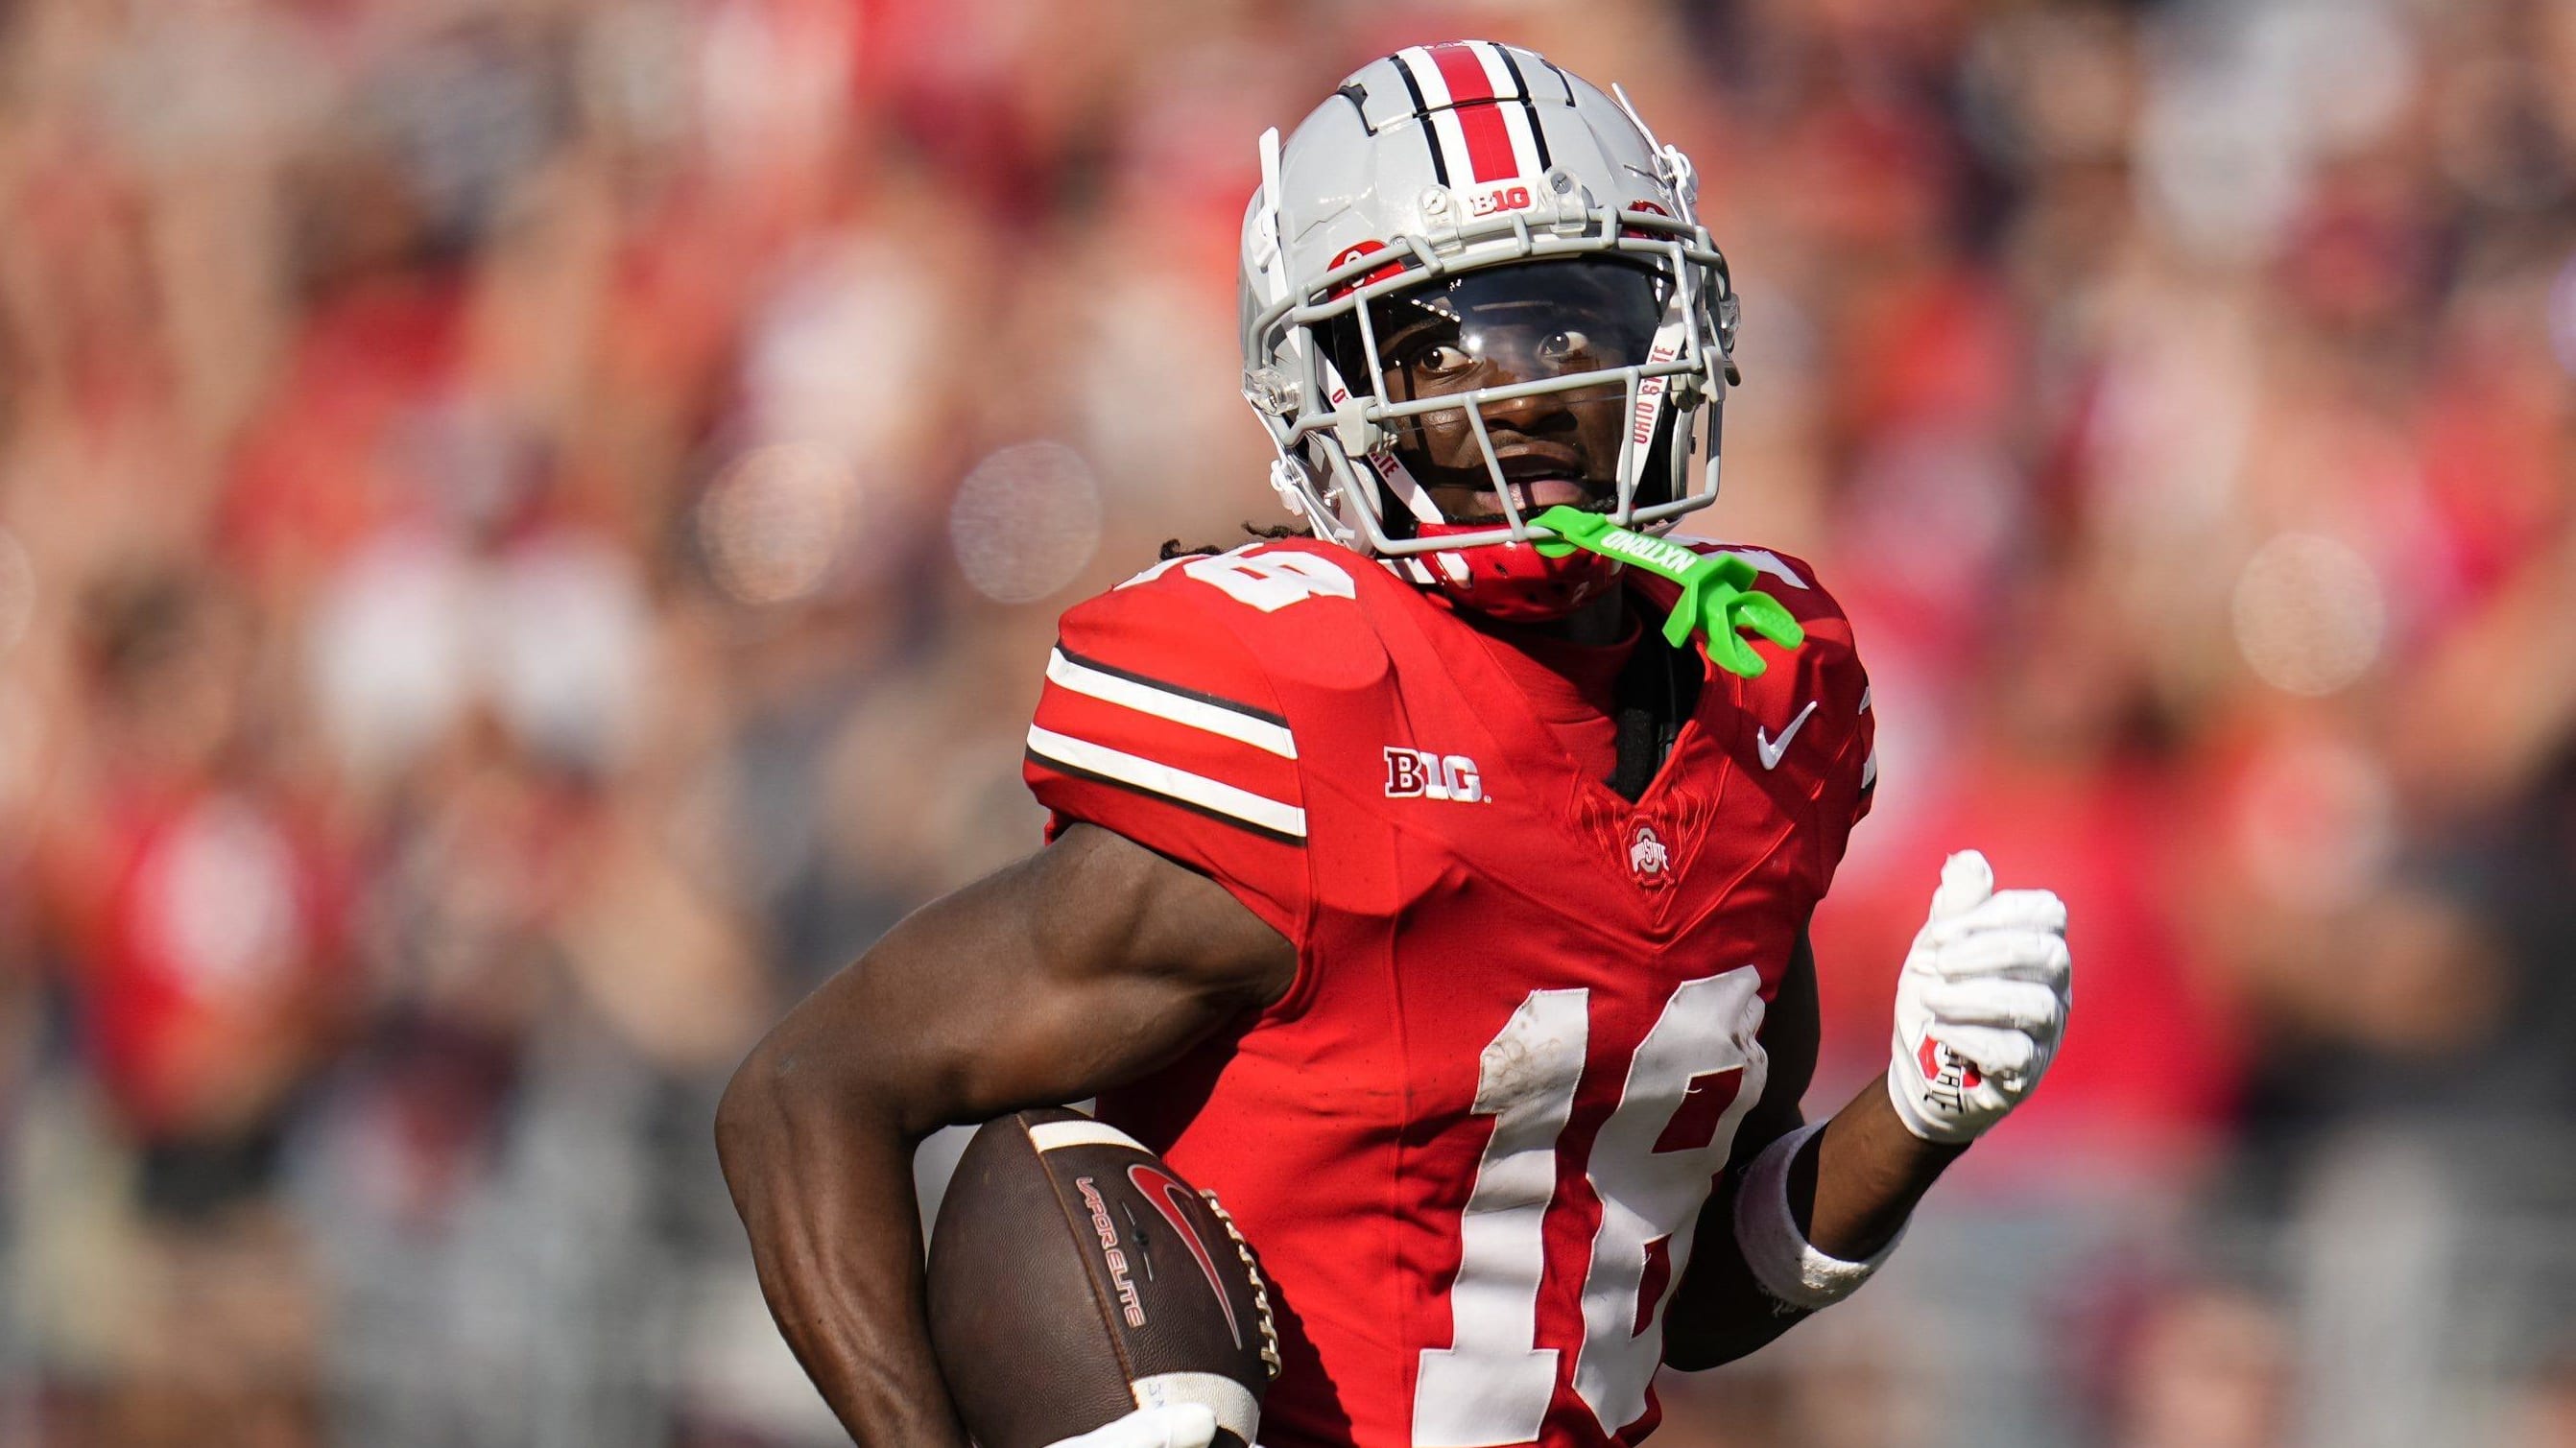 Ohio State wide receiver Marvin Harrison Jr. runs with the football.